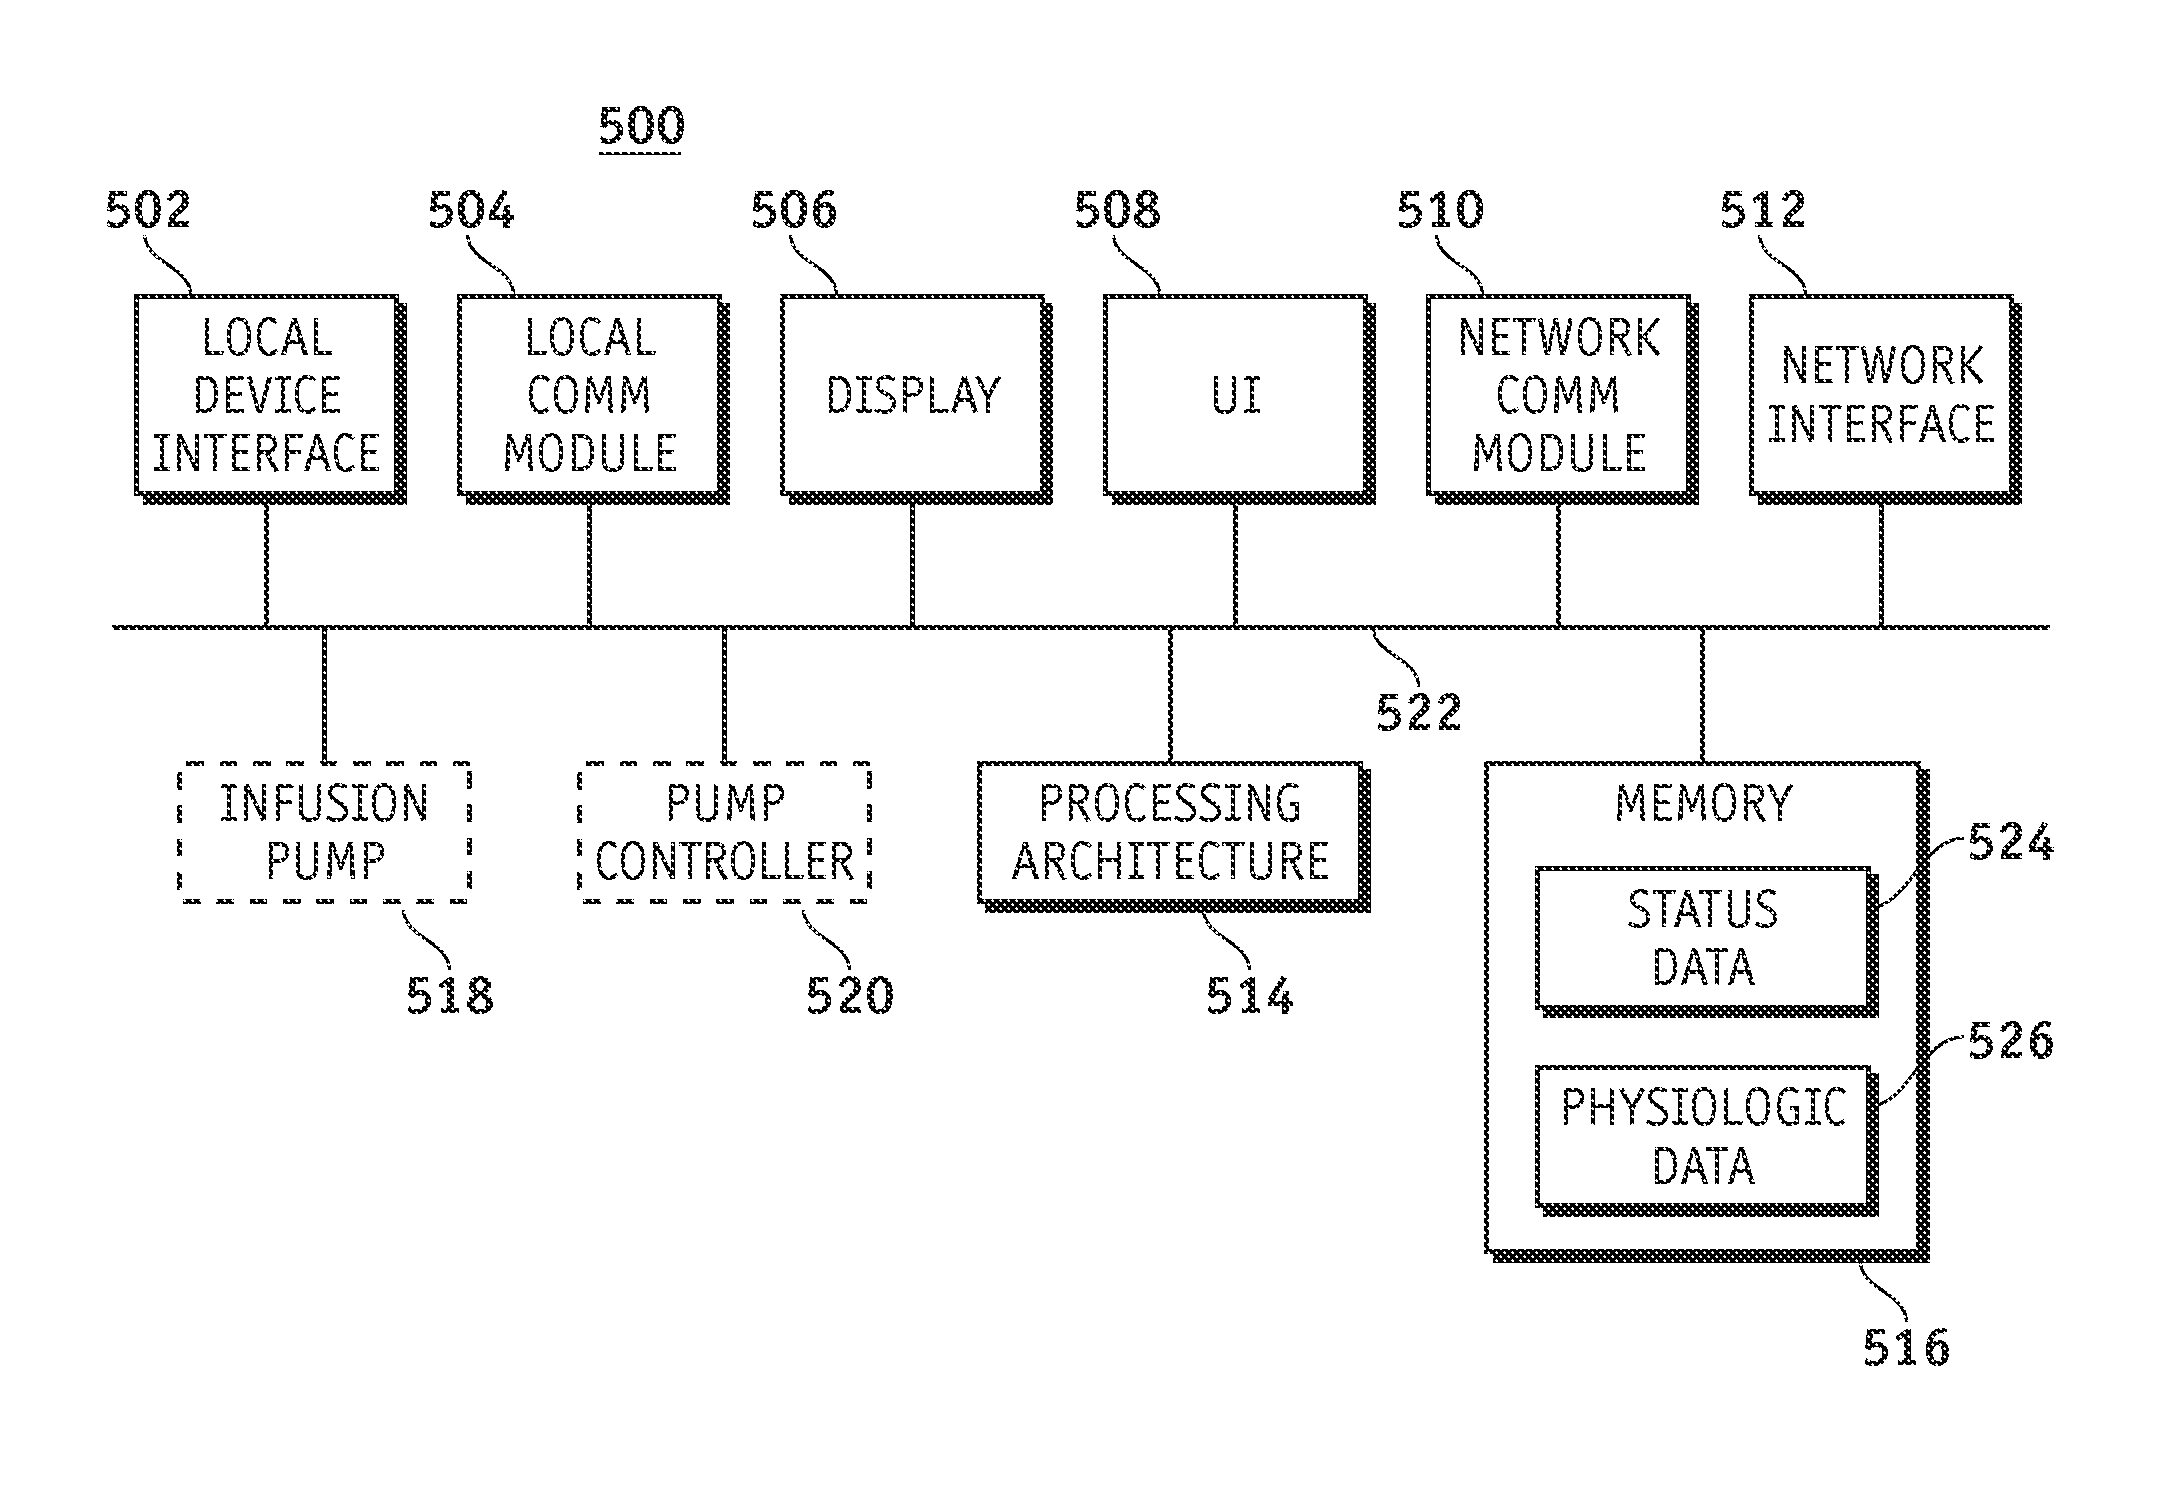 Remote monitoring for networked fluid infusion systems